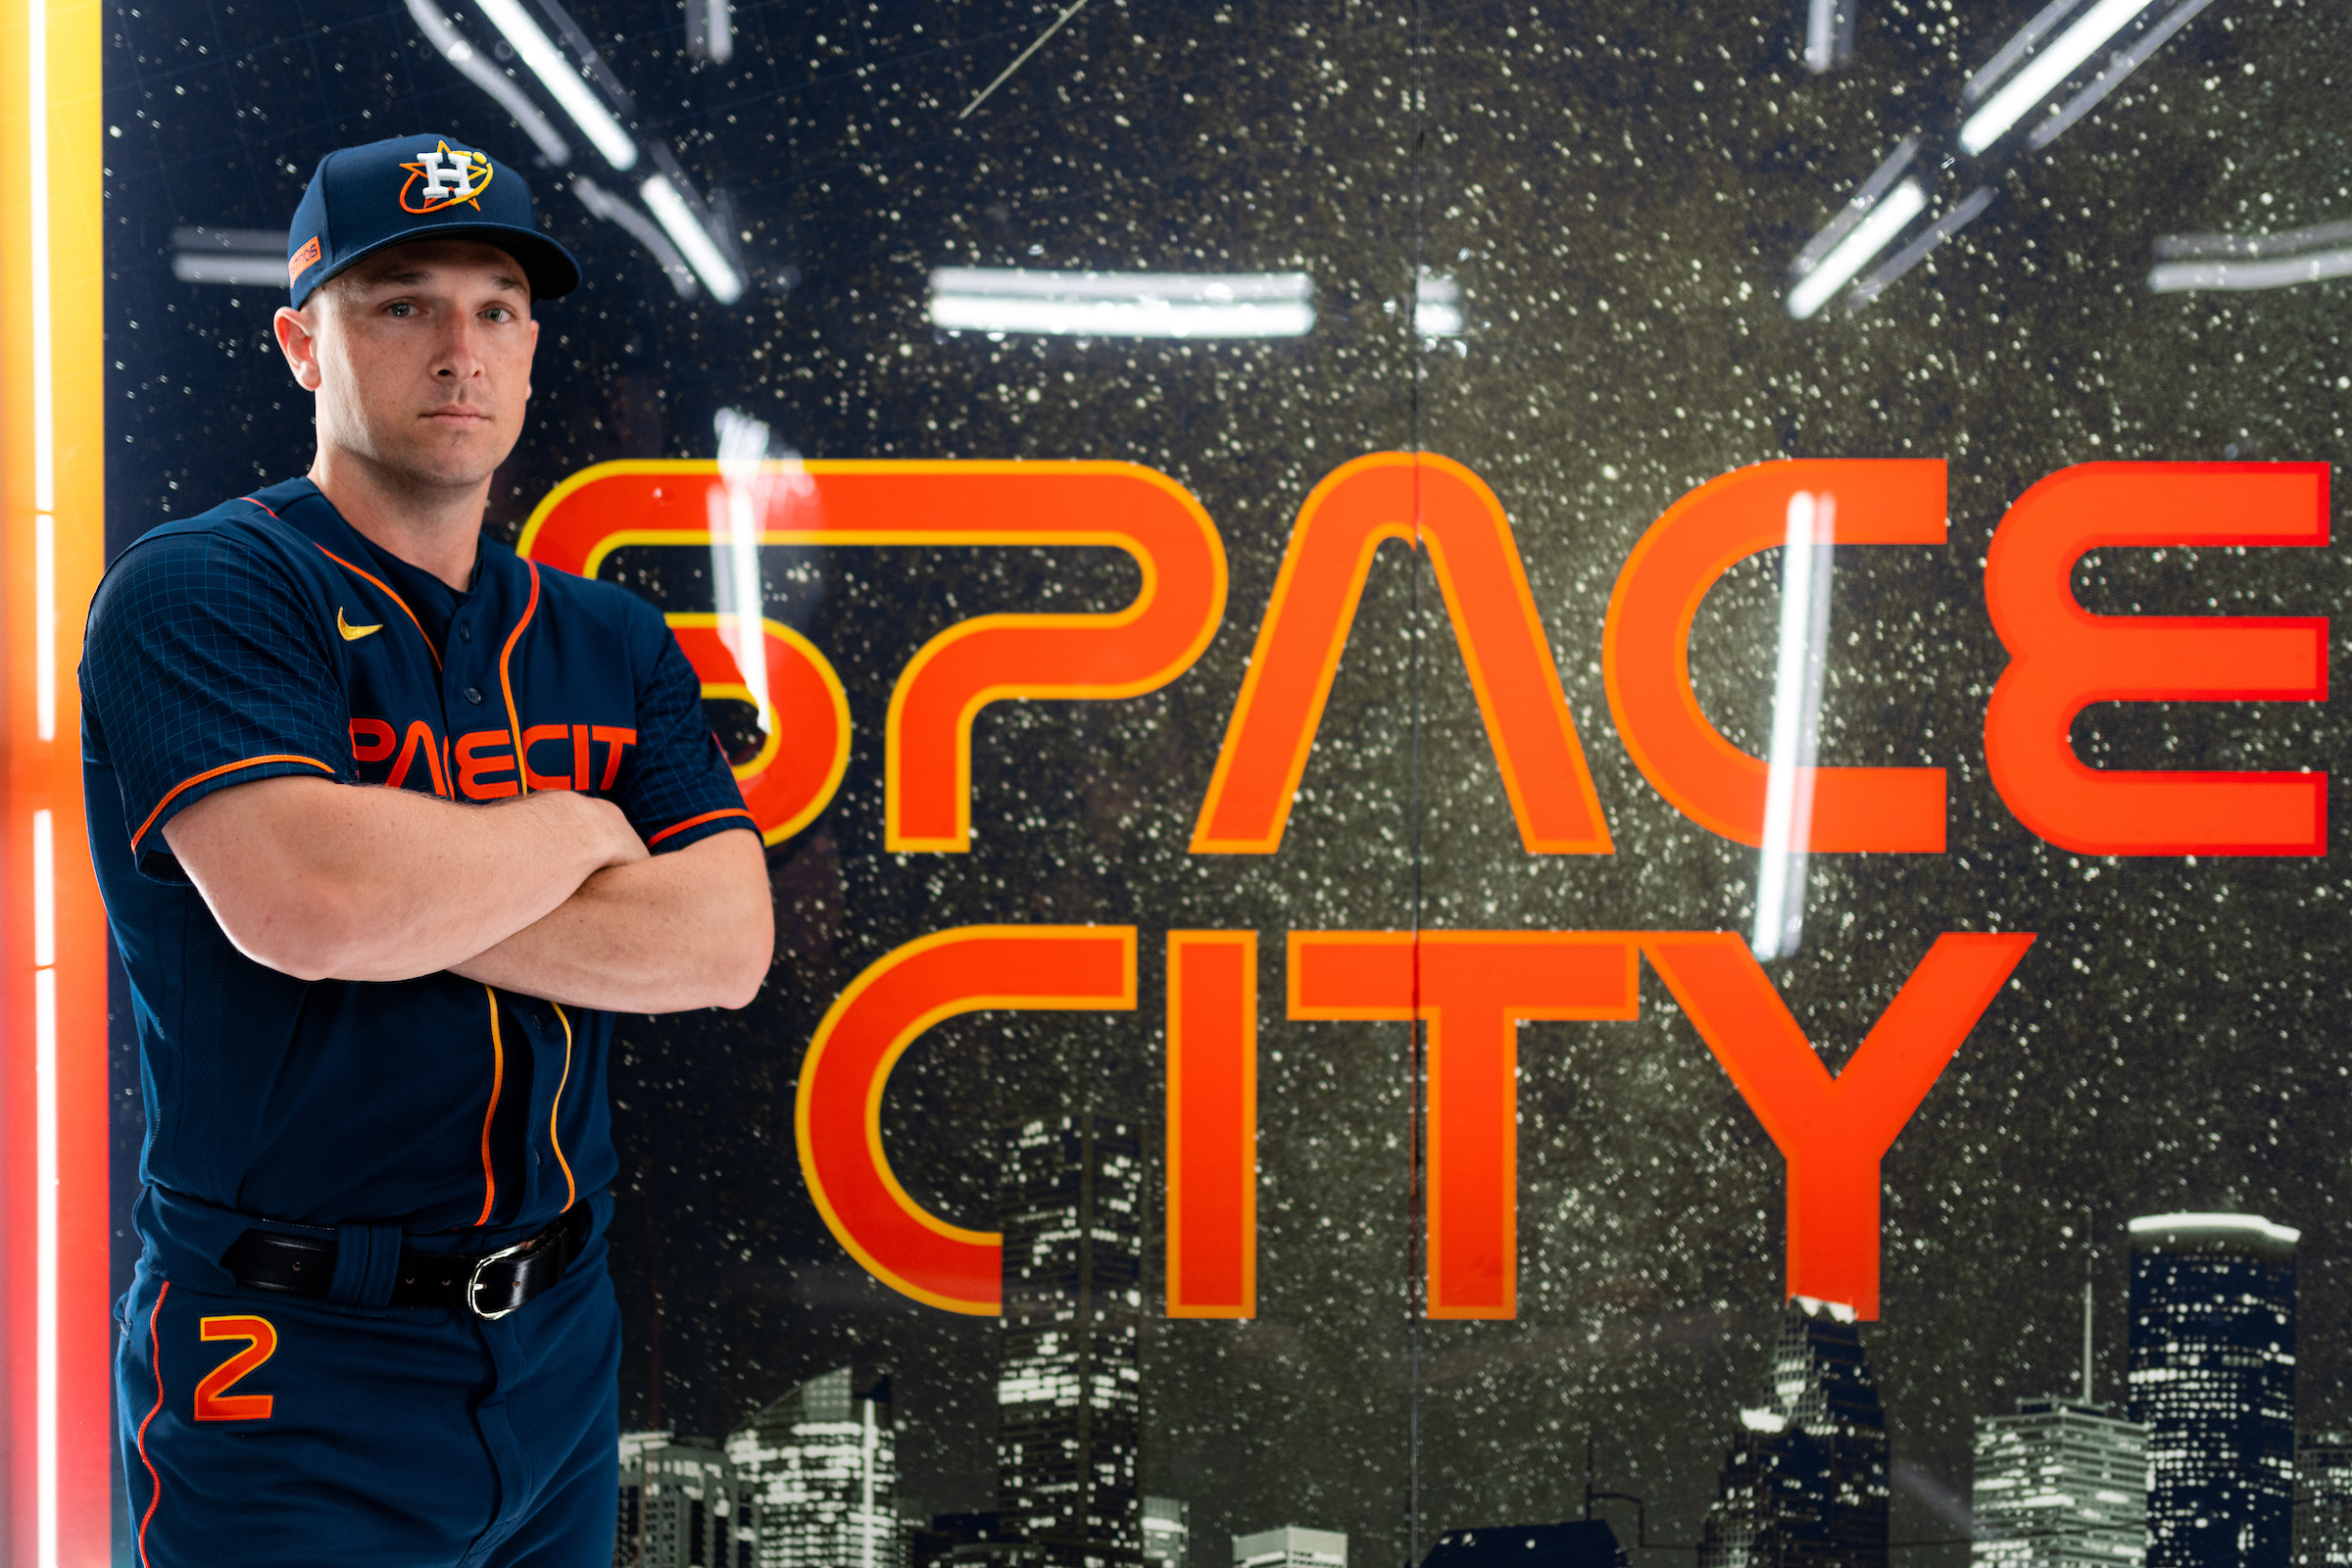 Reviewing the New Houston Astros Logo and Uniforms –